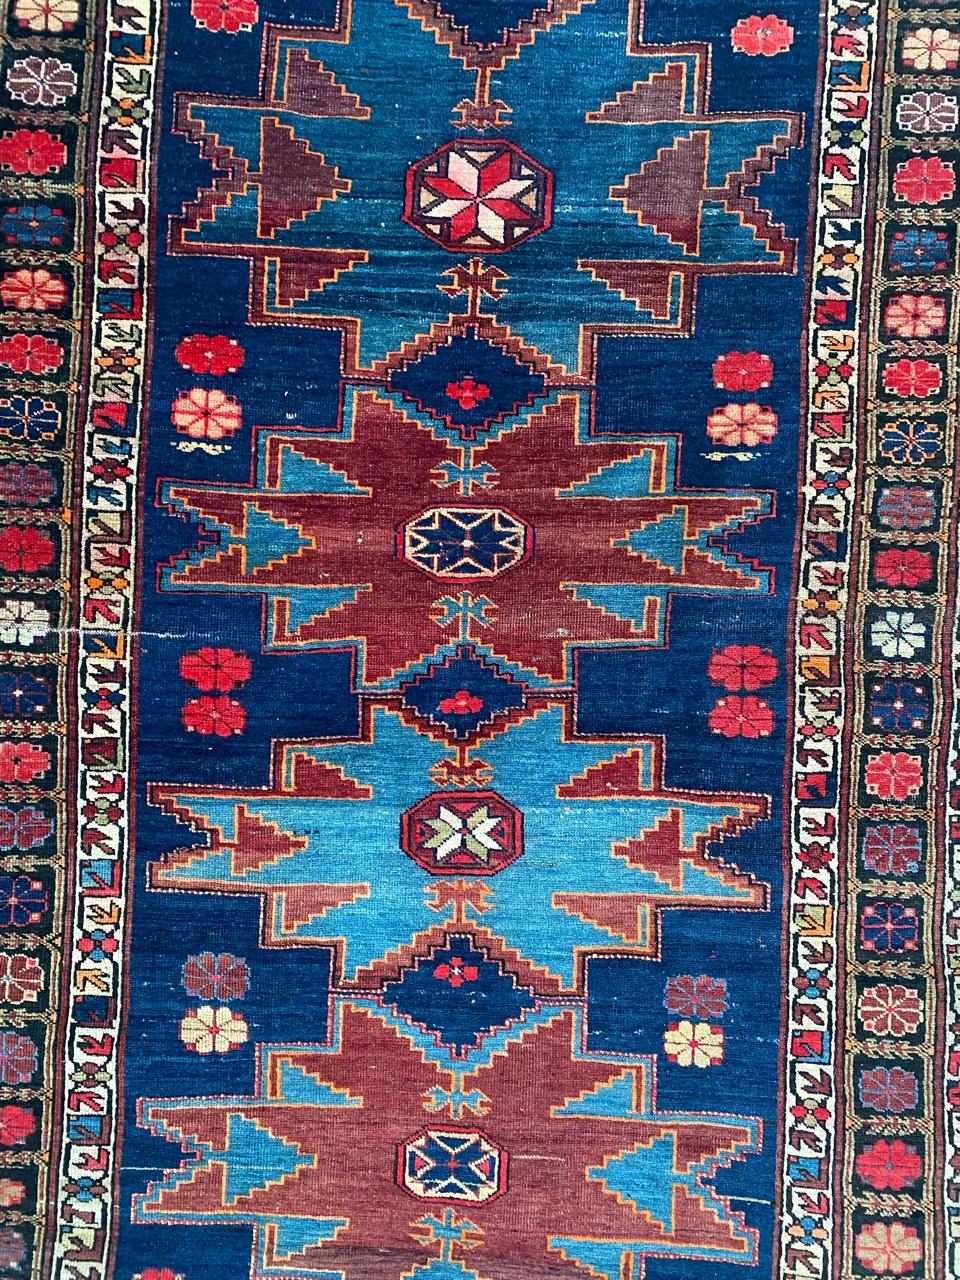 Discover the exquisite craftsmanship of this early 20th-century Caucasian Shirwan rug. Adorned with a captivating geometrical design and stunning natural colors, this rug is a testament to meticulous hand-knotting using wool velvet on a wool